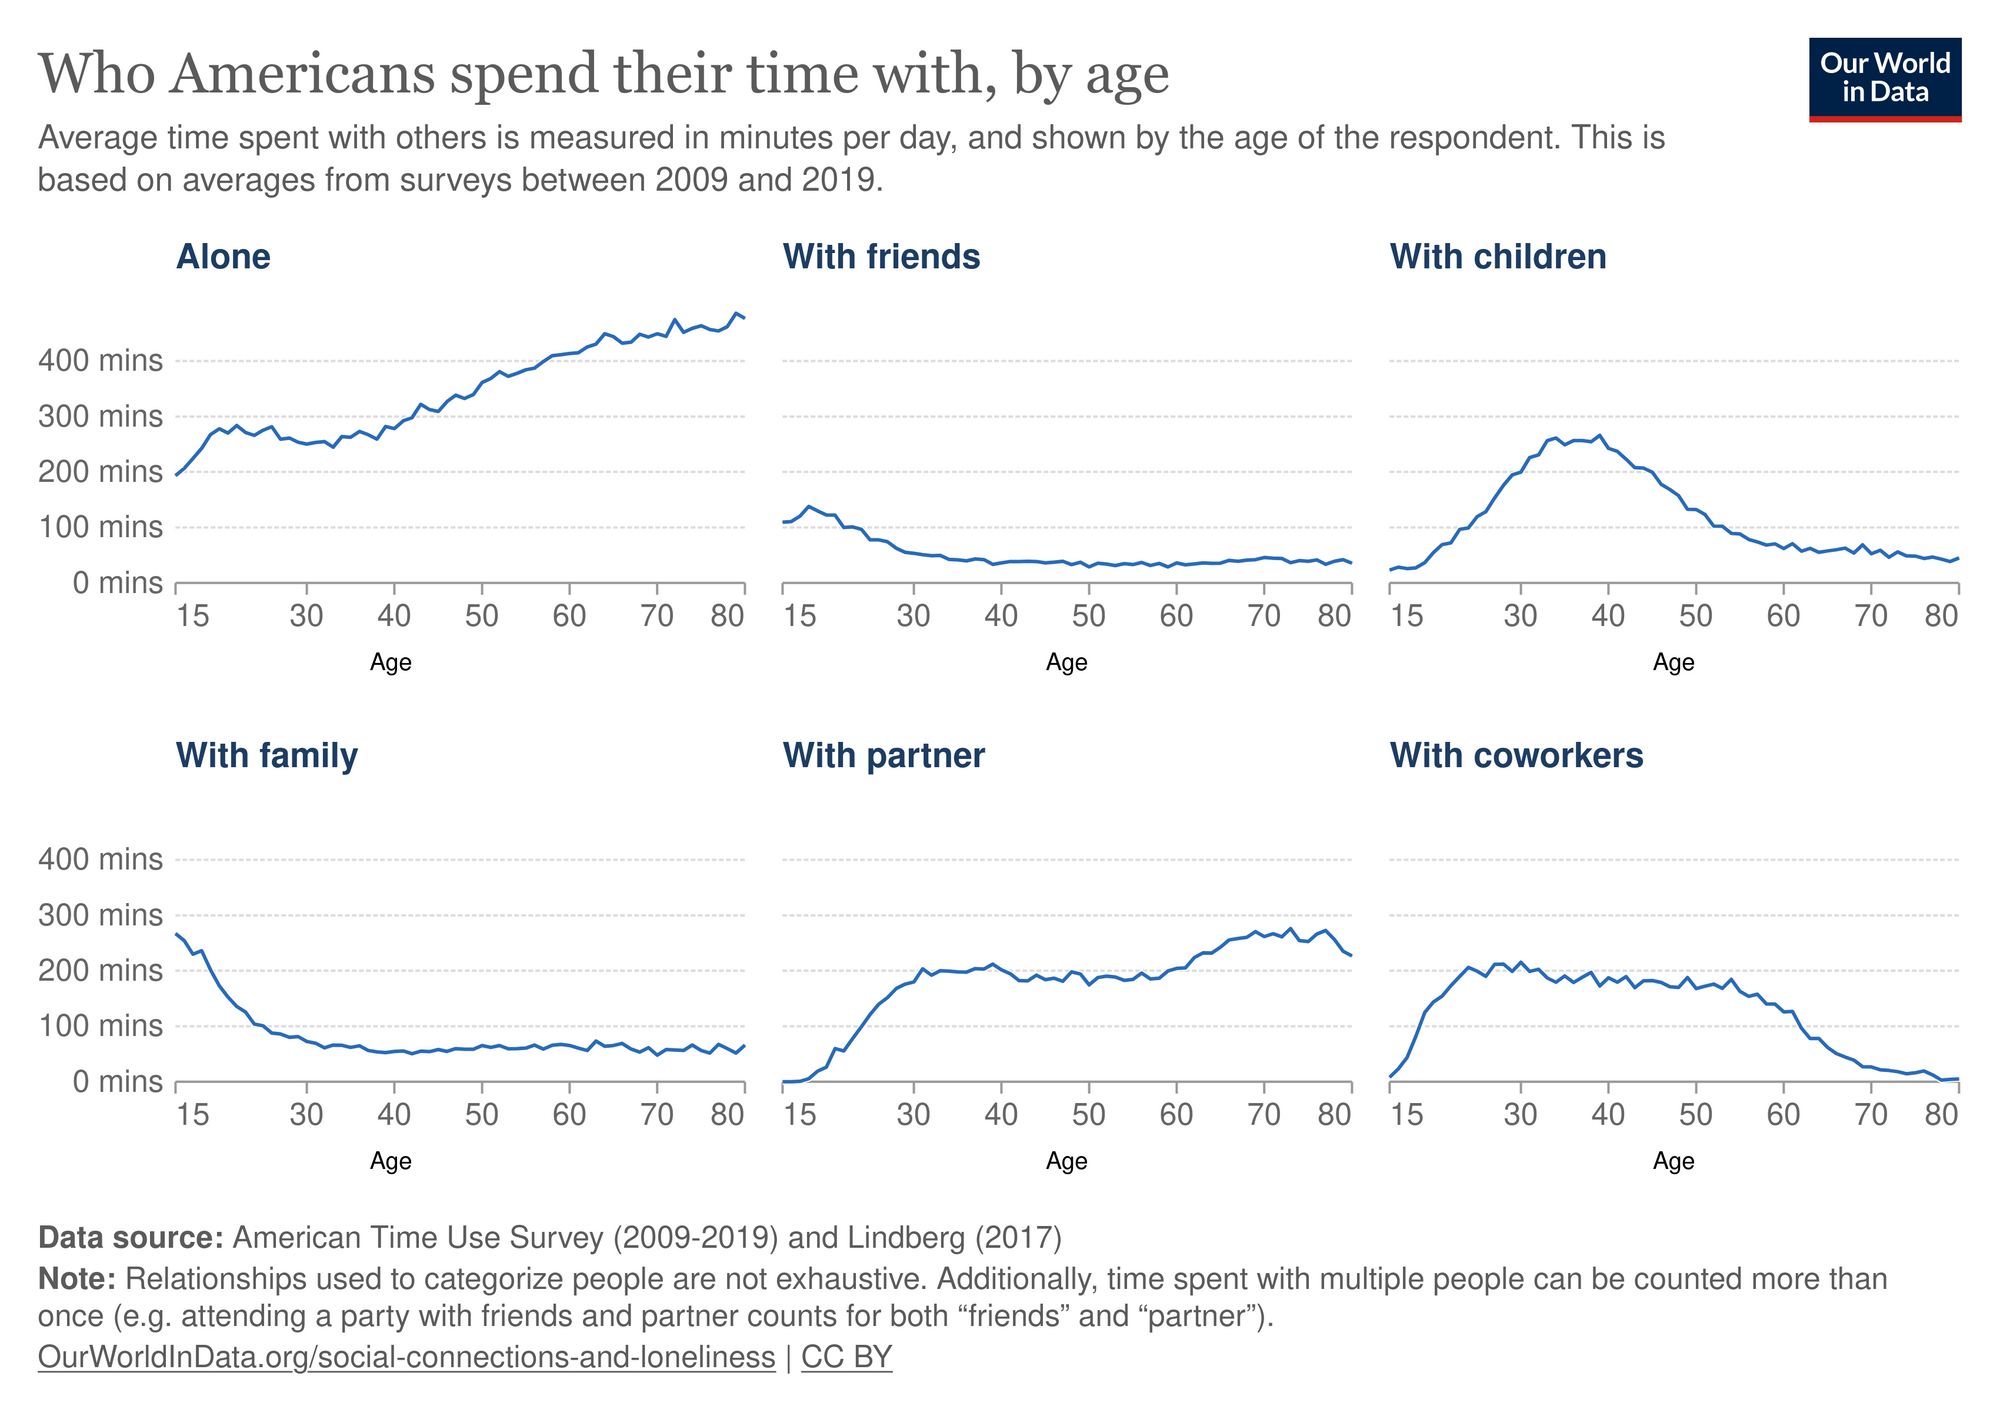 Infographic titled 'Who Americans spend their time with, by age'. It consists of six line graphs, each displaying the average minutes per day individuals spend: 'Alone', 'With friends', 'With children', 'With family', 'With partner', and 'With coworkers'. The x-axis represents age from 15 to 80, and the y-axis denotes time from 0 to 400 minutes. The graphs depict trends like increasing solitude with age, peak time with friends in early adulthood, and significant time with children during midlife. Data is sourced from the American Time Use Survey (2009-2019) and Lindberg (2017), with a note clarifying relationship categorizations.